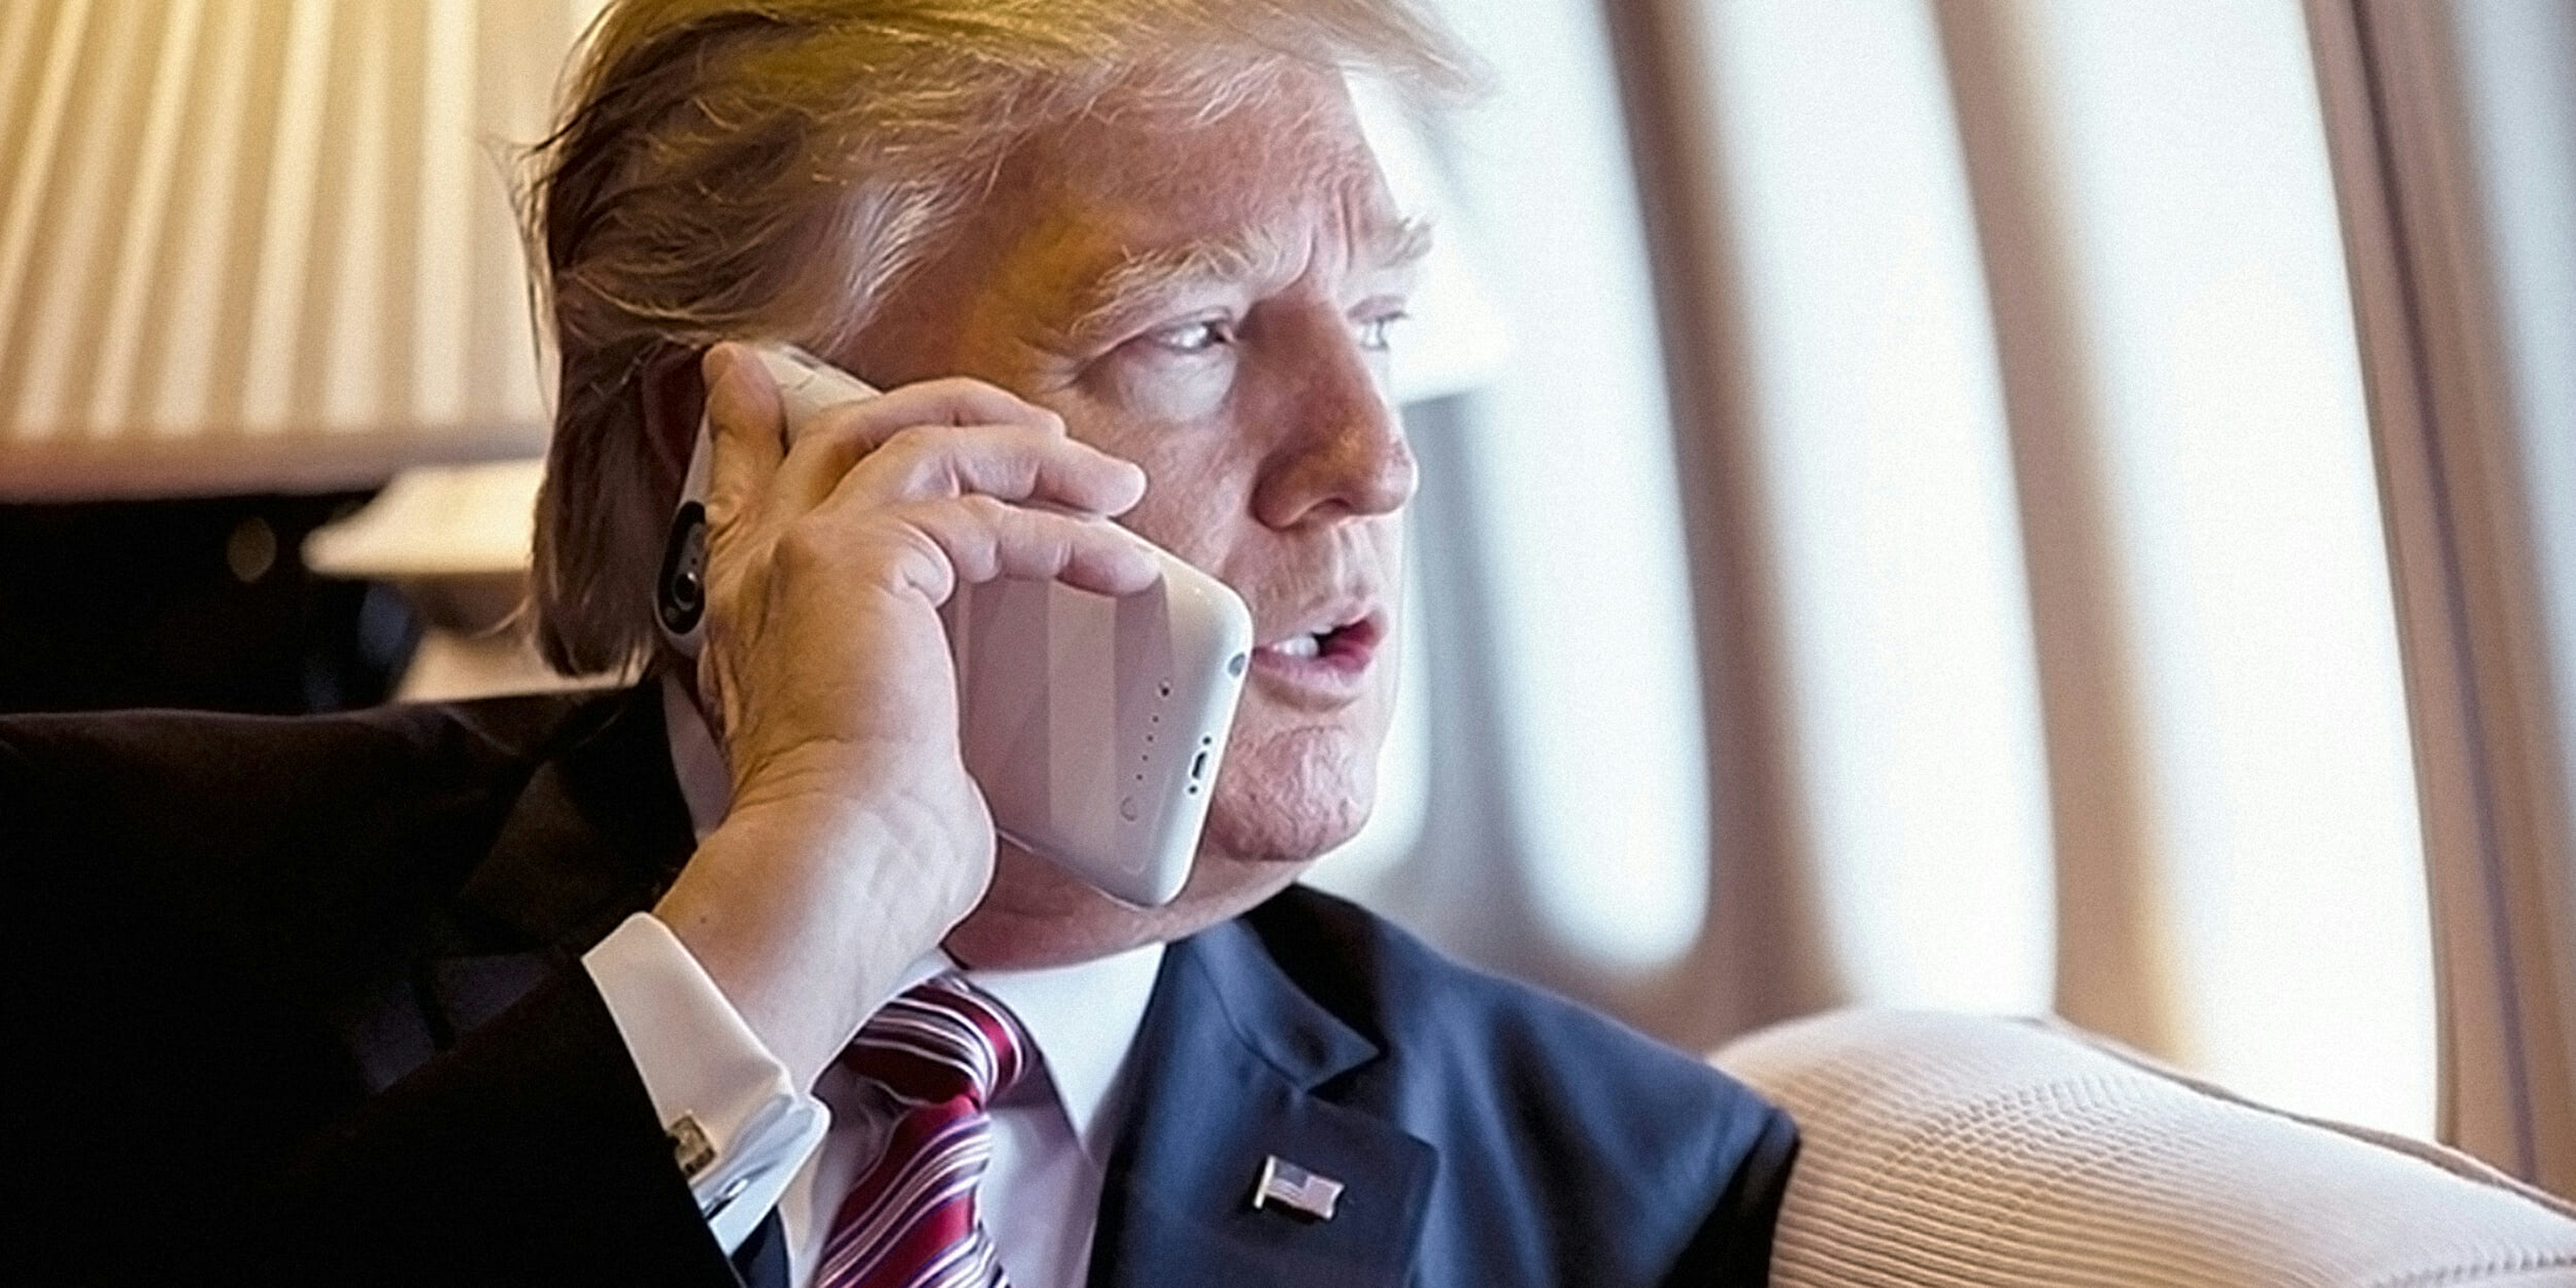 Donald Trump on phone. Manafort's wiretapping doesn't vindicate Trump's claims.